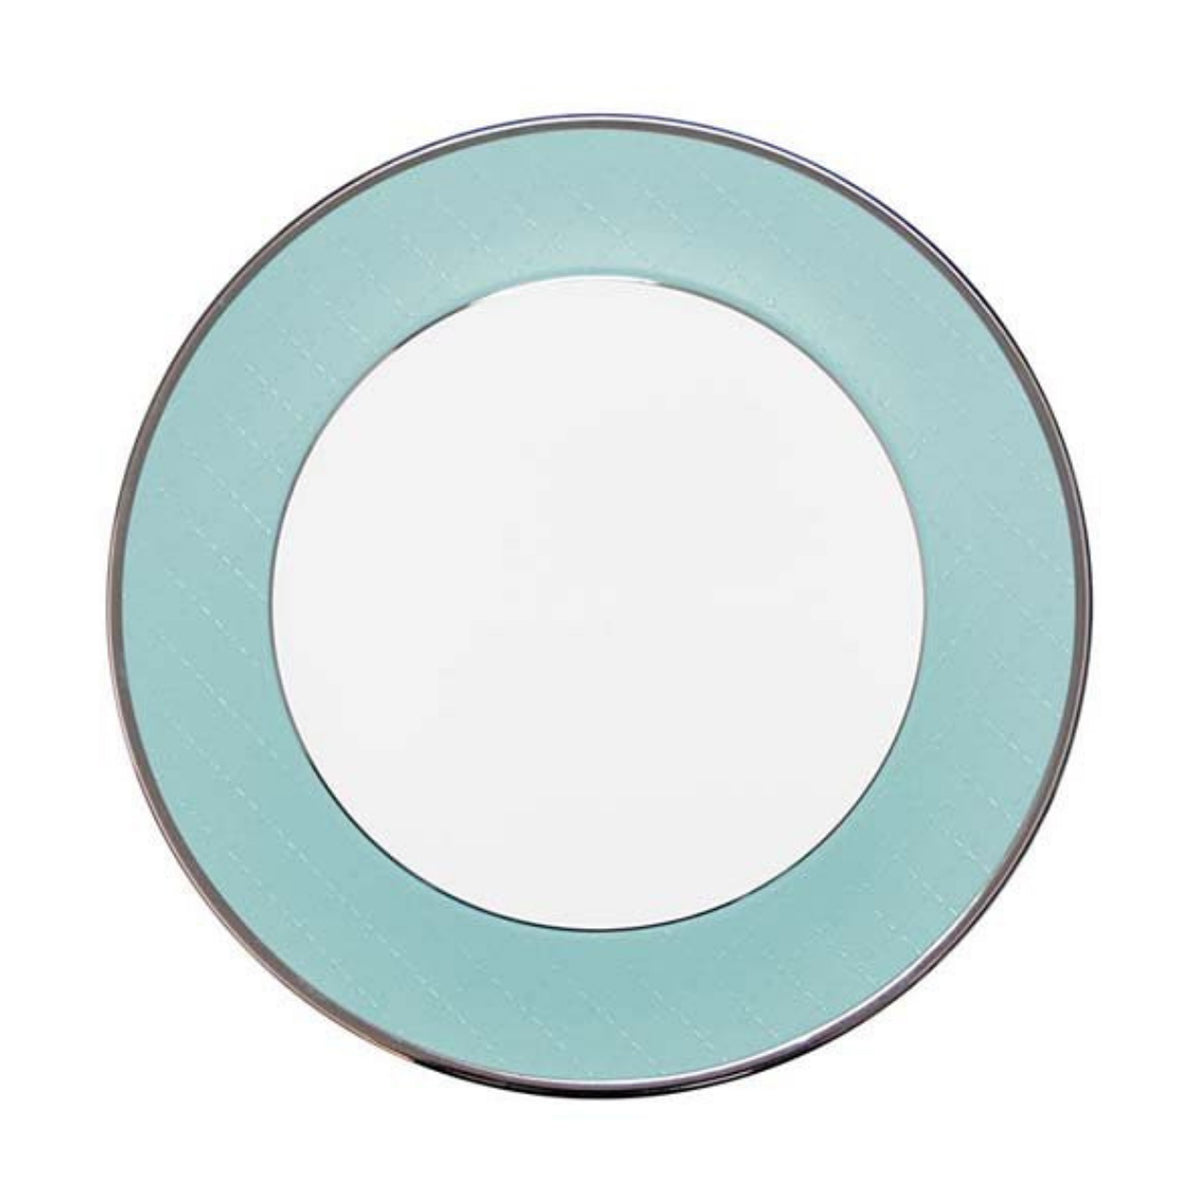 ETHEREAL BLUE SERVICE PLATE 31CM